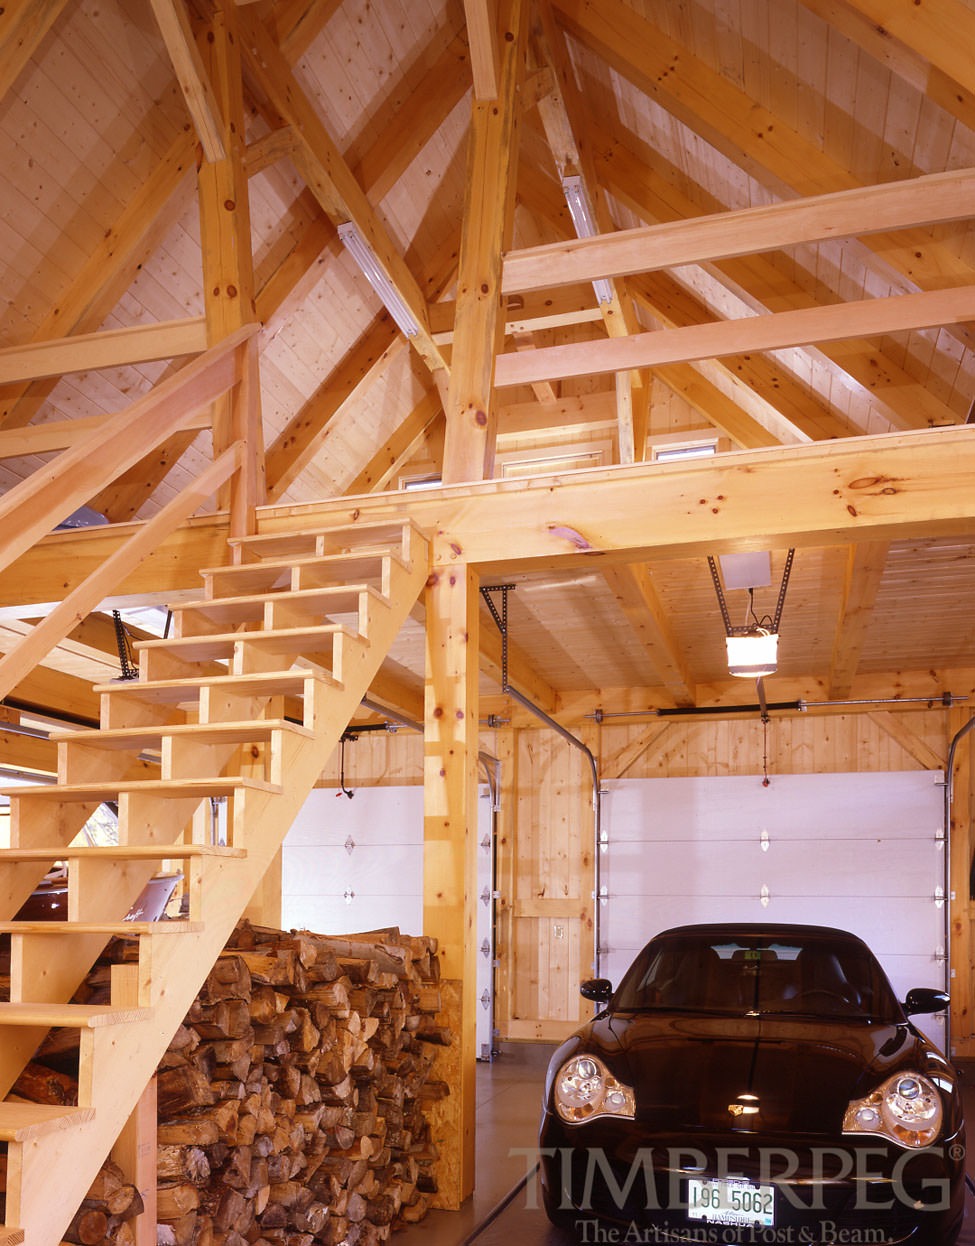 Garage Barn (5857) interior view with car, stacked wood, and stairs to loft